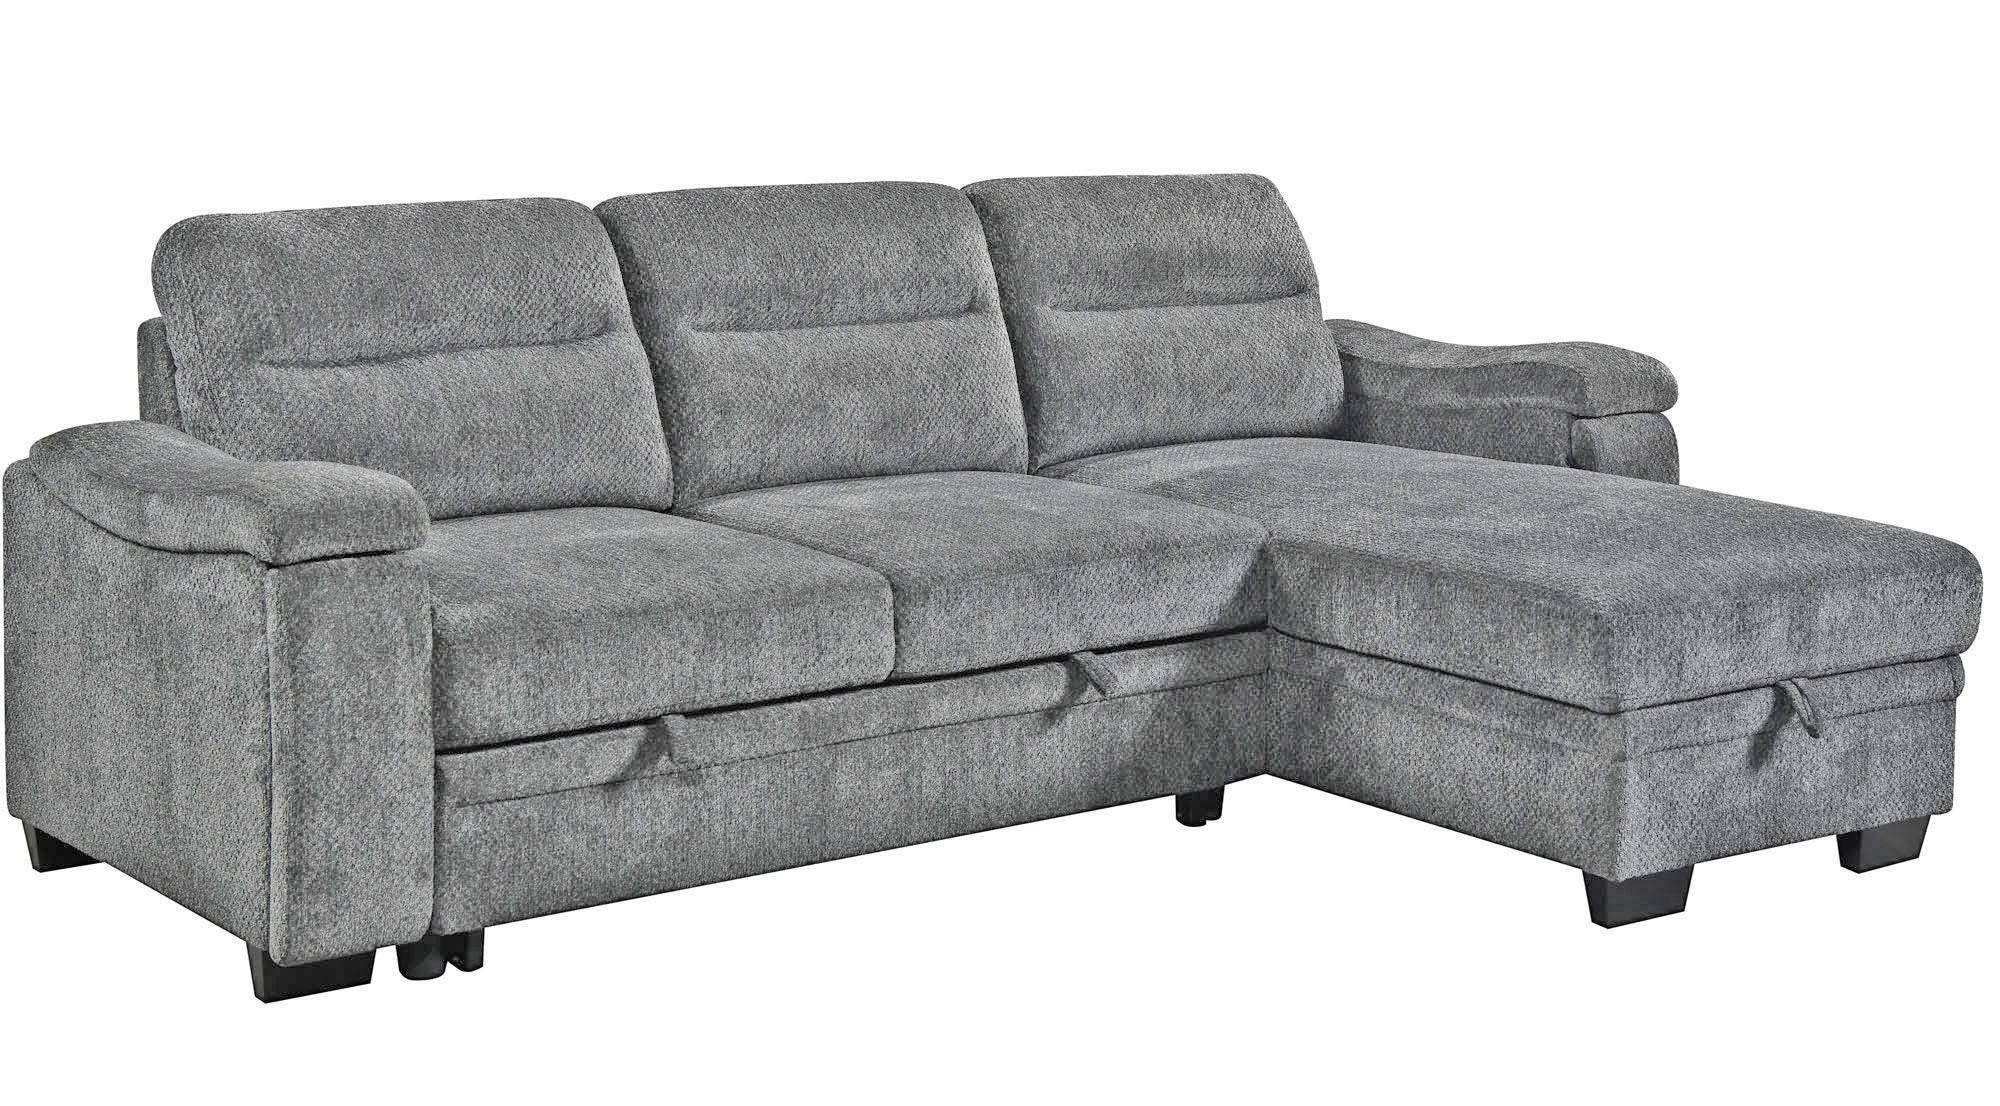 Ty 2 Piece Sleeper Sectional - MJM Furniture